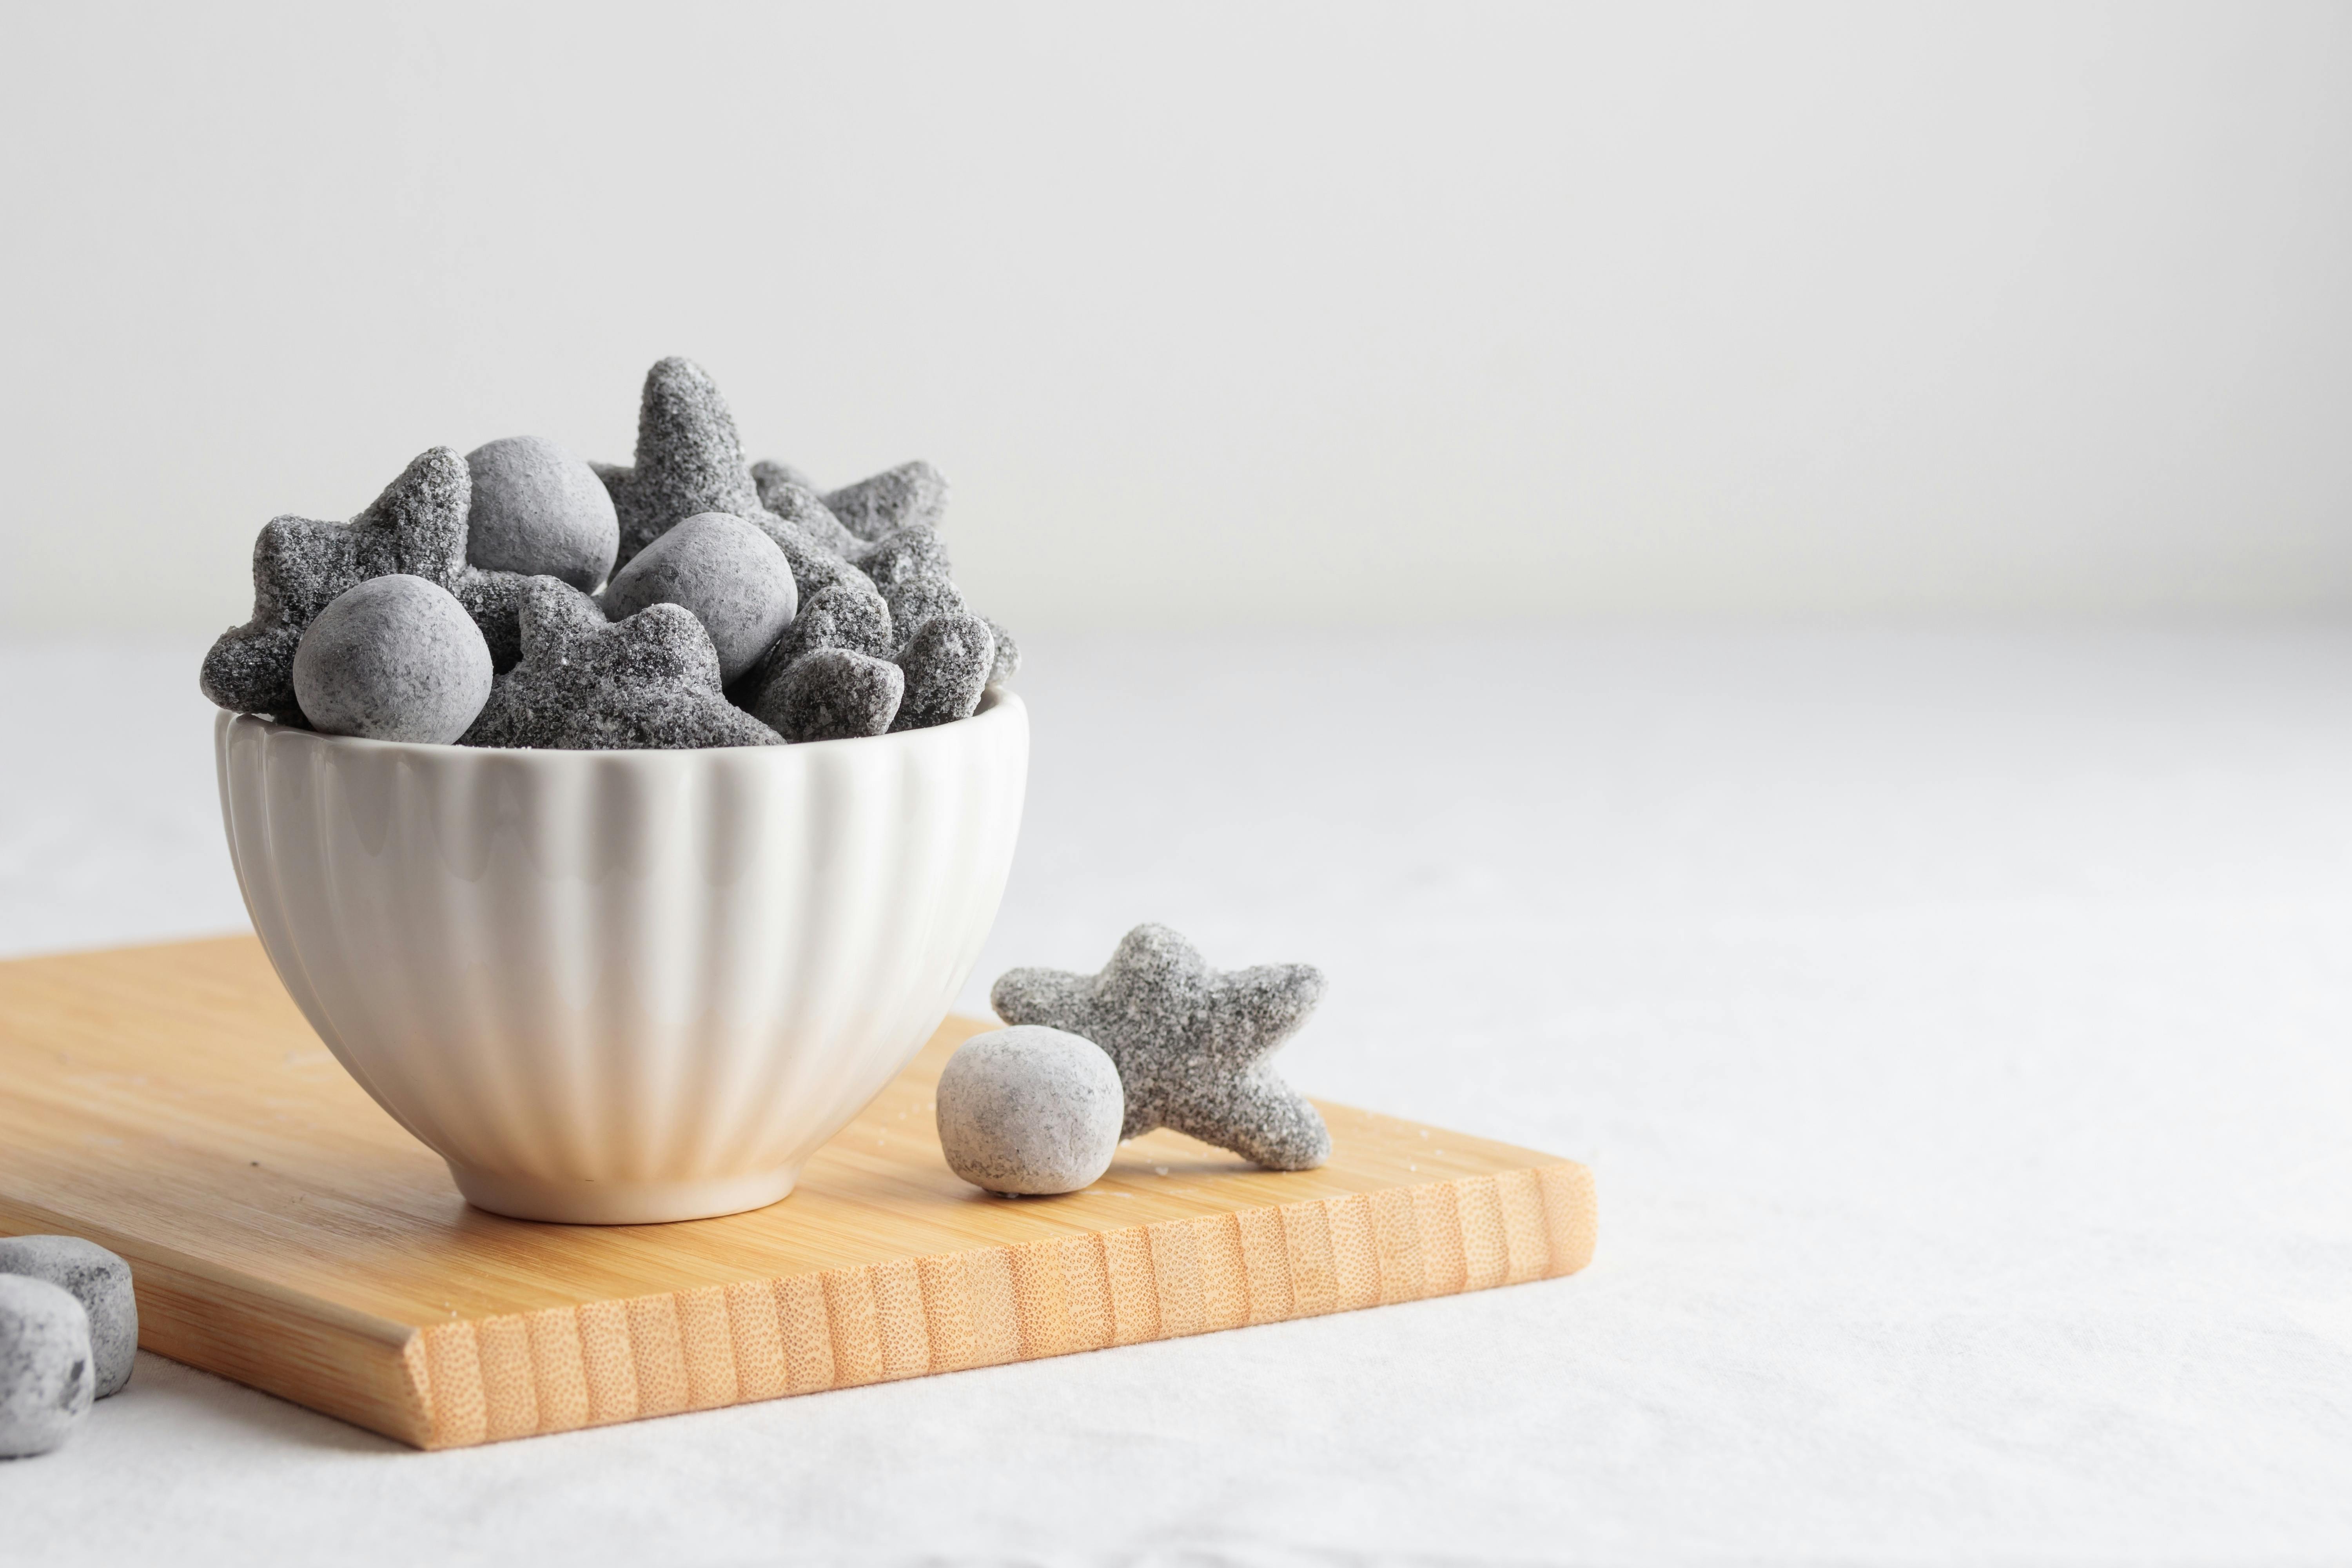 A bowl of salty licorice candy on a wooden board.